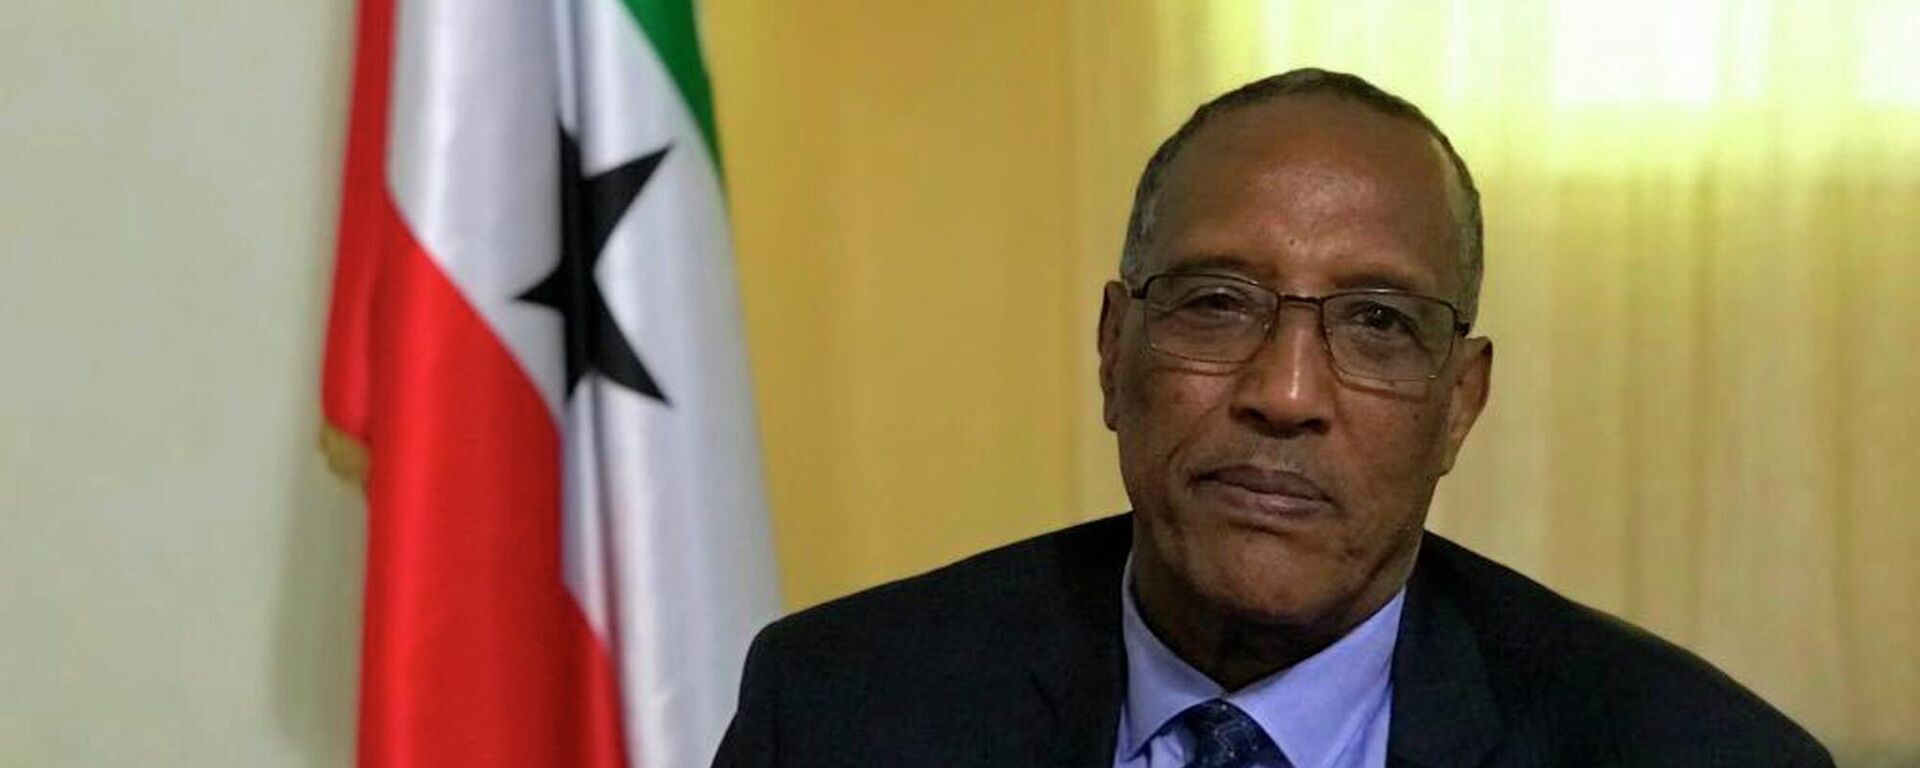 In this Tuesday, April, 3, 2018 photo, Muse Bihi Abdi, the President of Somaliland speaks to The Associated Press in Hergeisa, Somaliland, Somalia. The breakaway northern region of Somaliland declared its independence nearly three decades ago, but despite having its own currency, parliament and military the predominantly Muslim country hasn’t been recognized by any foreign government. Abdi is hoping to change that by aligning his country’s interests with energy-rich Gulf Arab states eager to expand their military footprint in the Horn of Africa. (AP Photo/Malak Harb) - Sputnik International, 1920, 02.10.2022